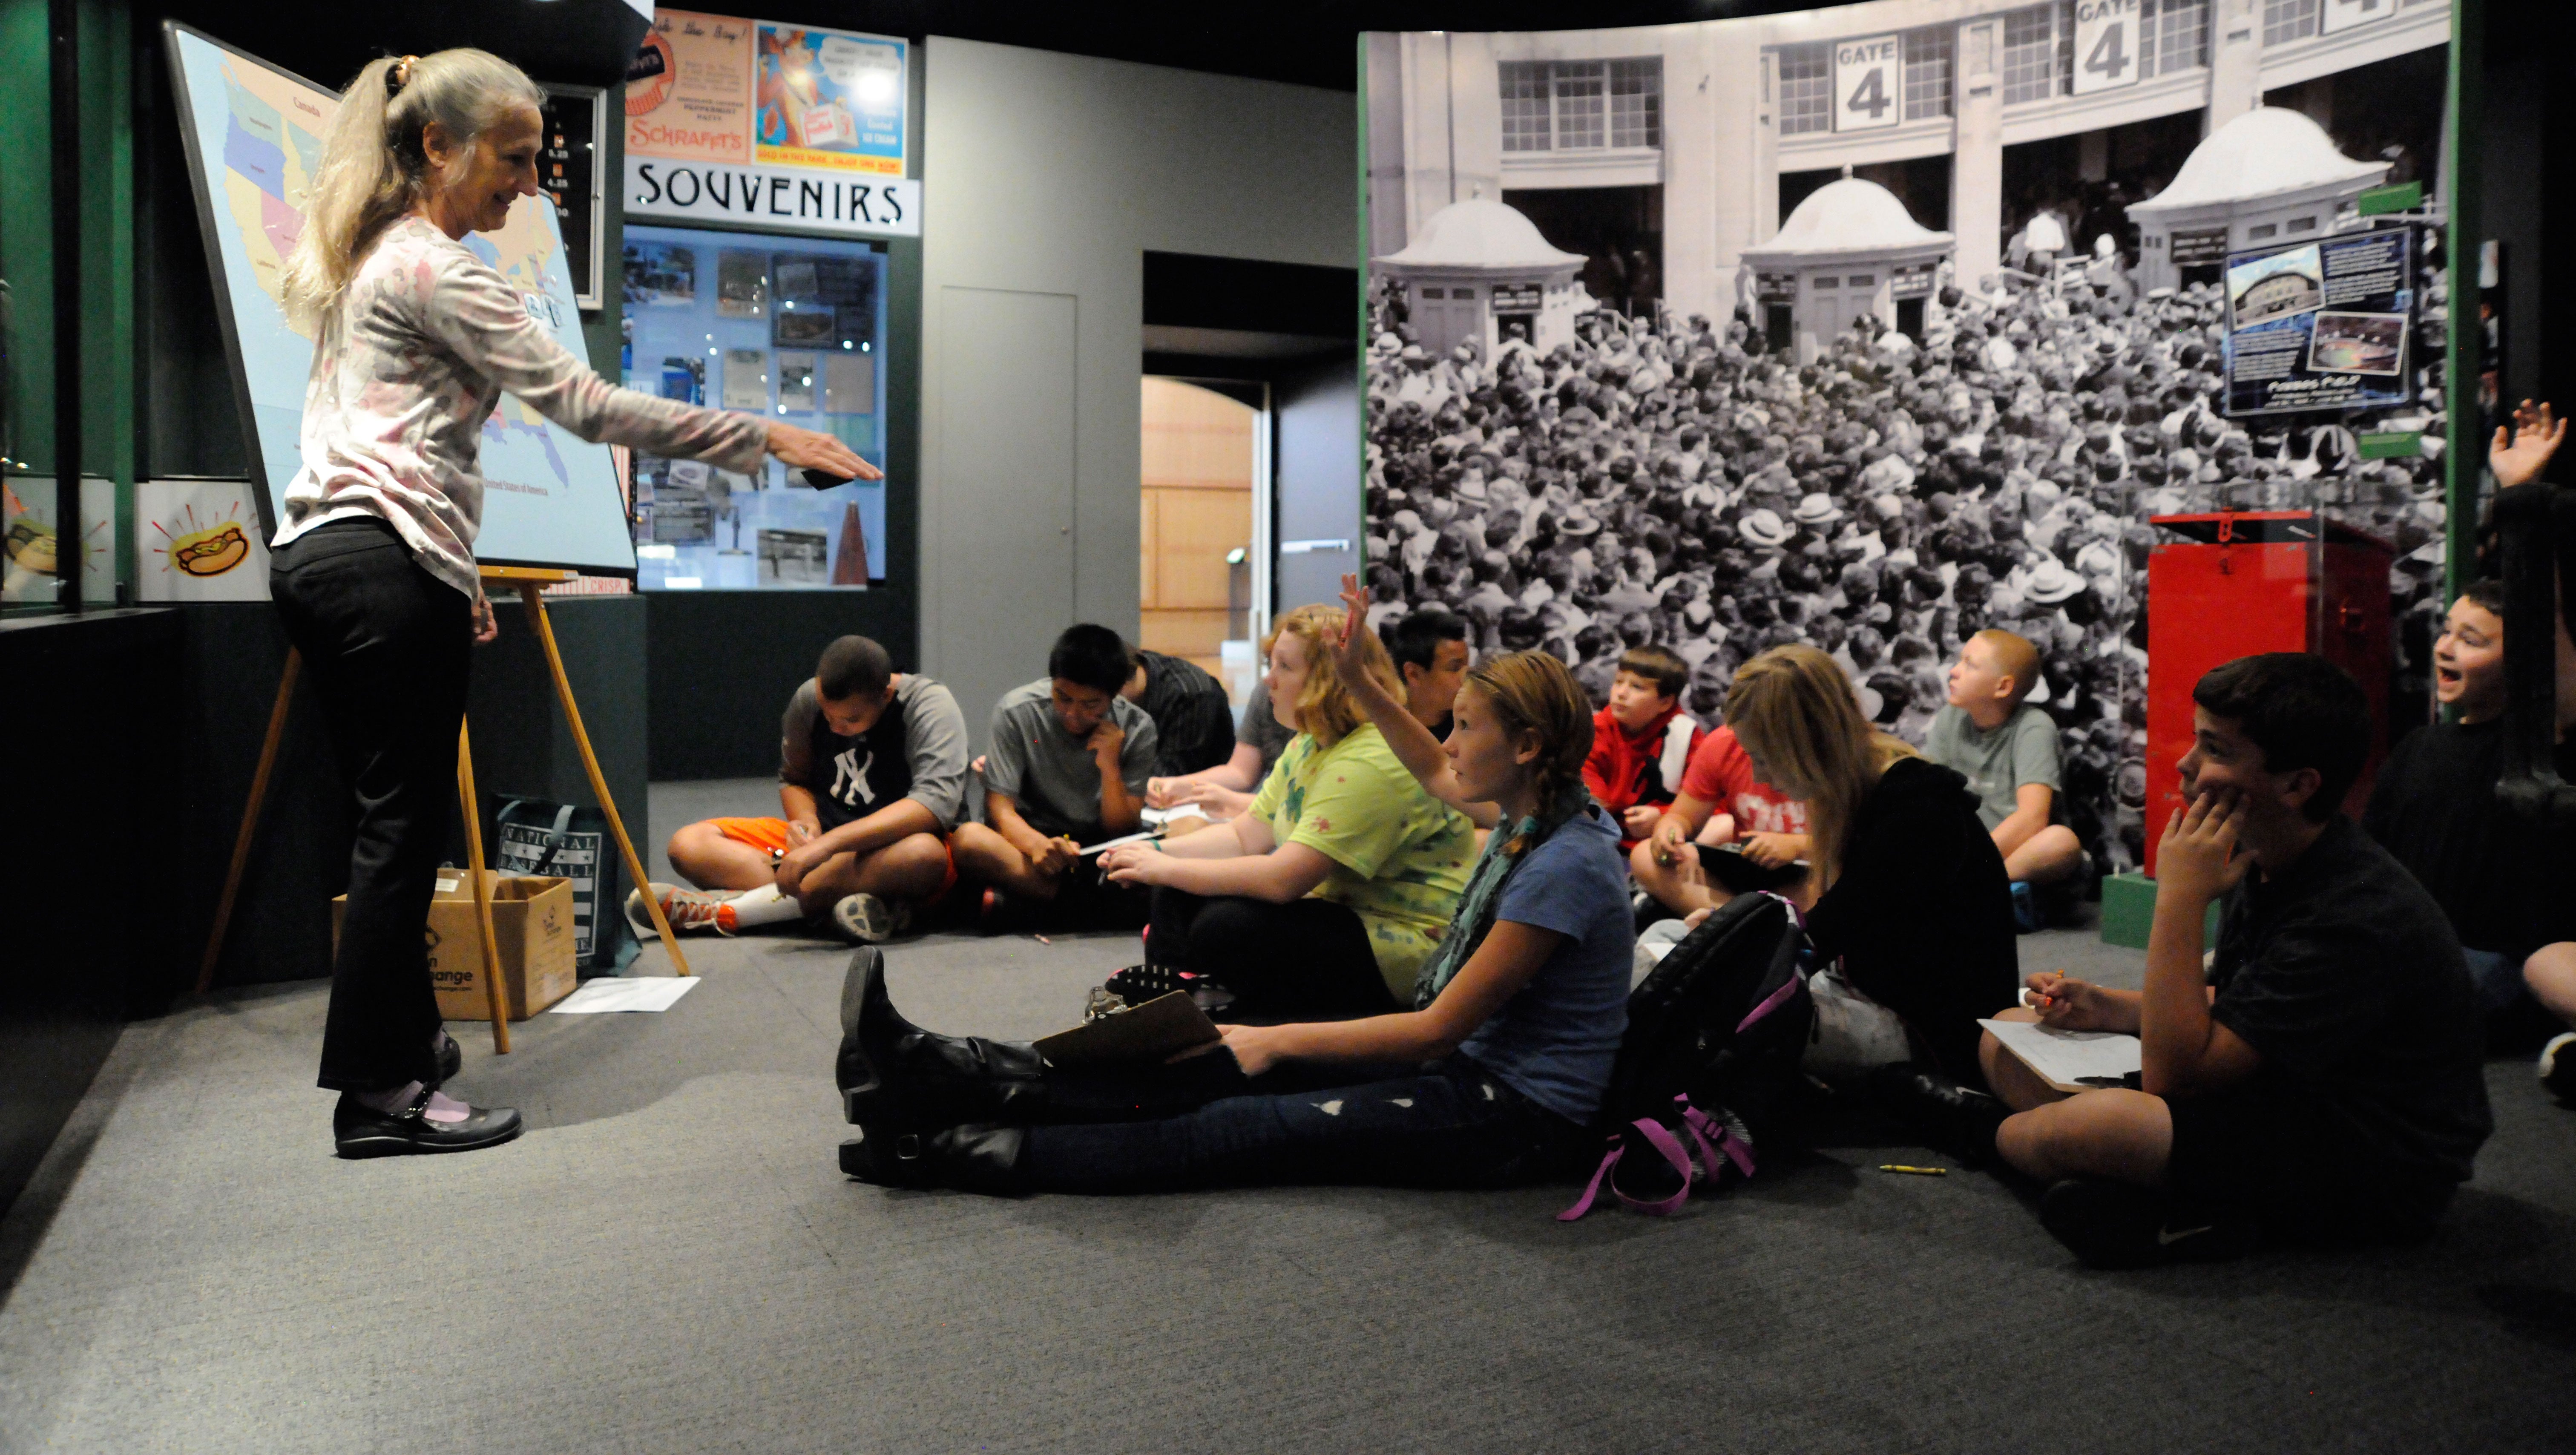 Students particpating in a lesson during a field trip to the Museum